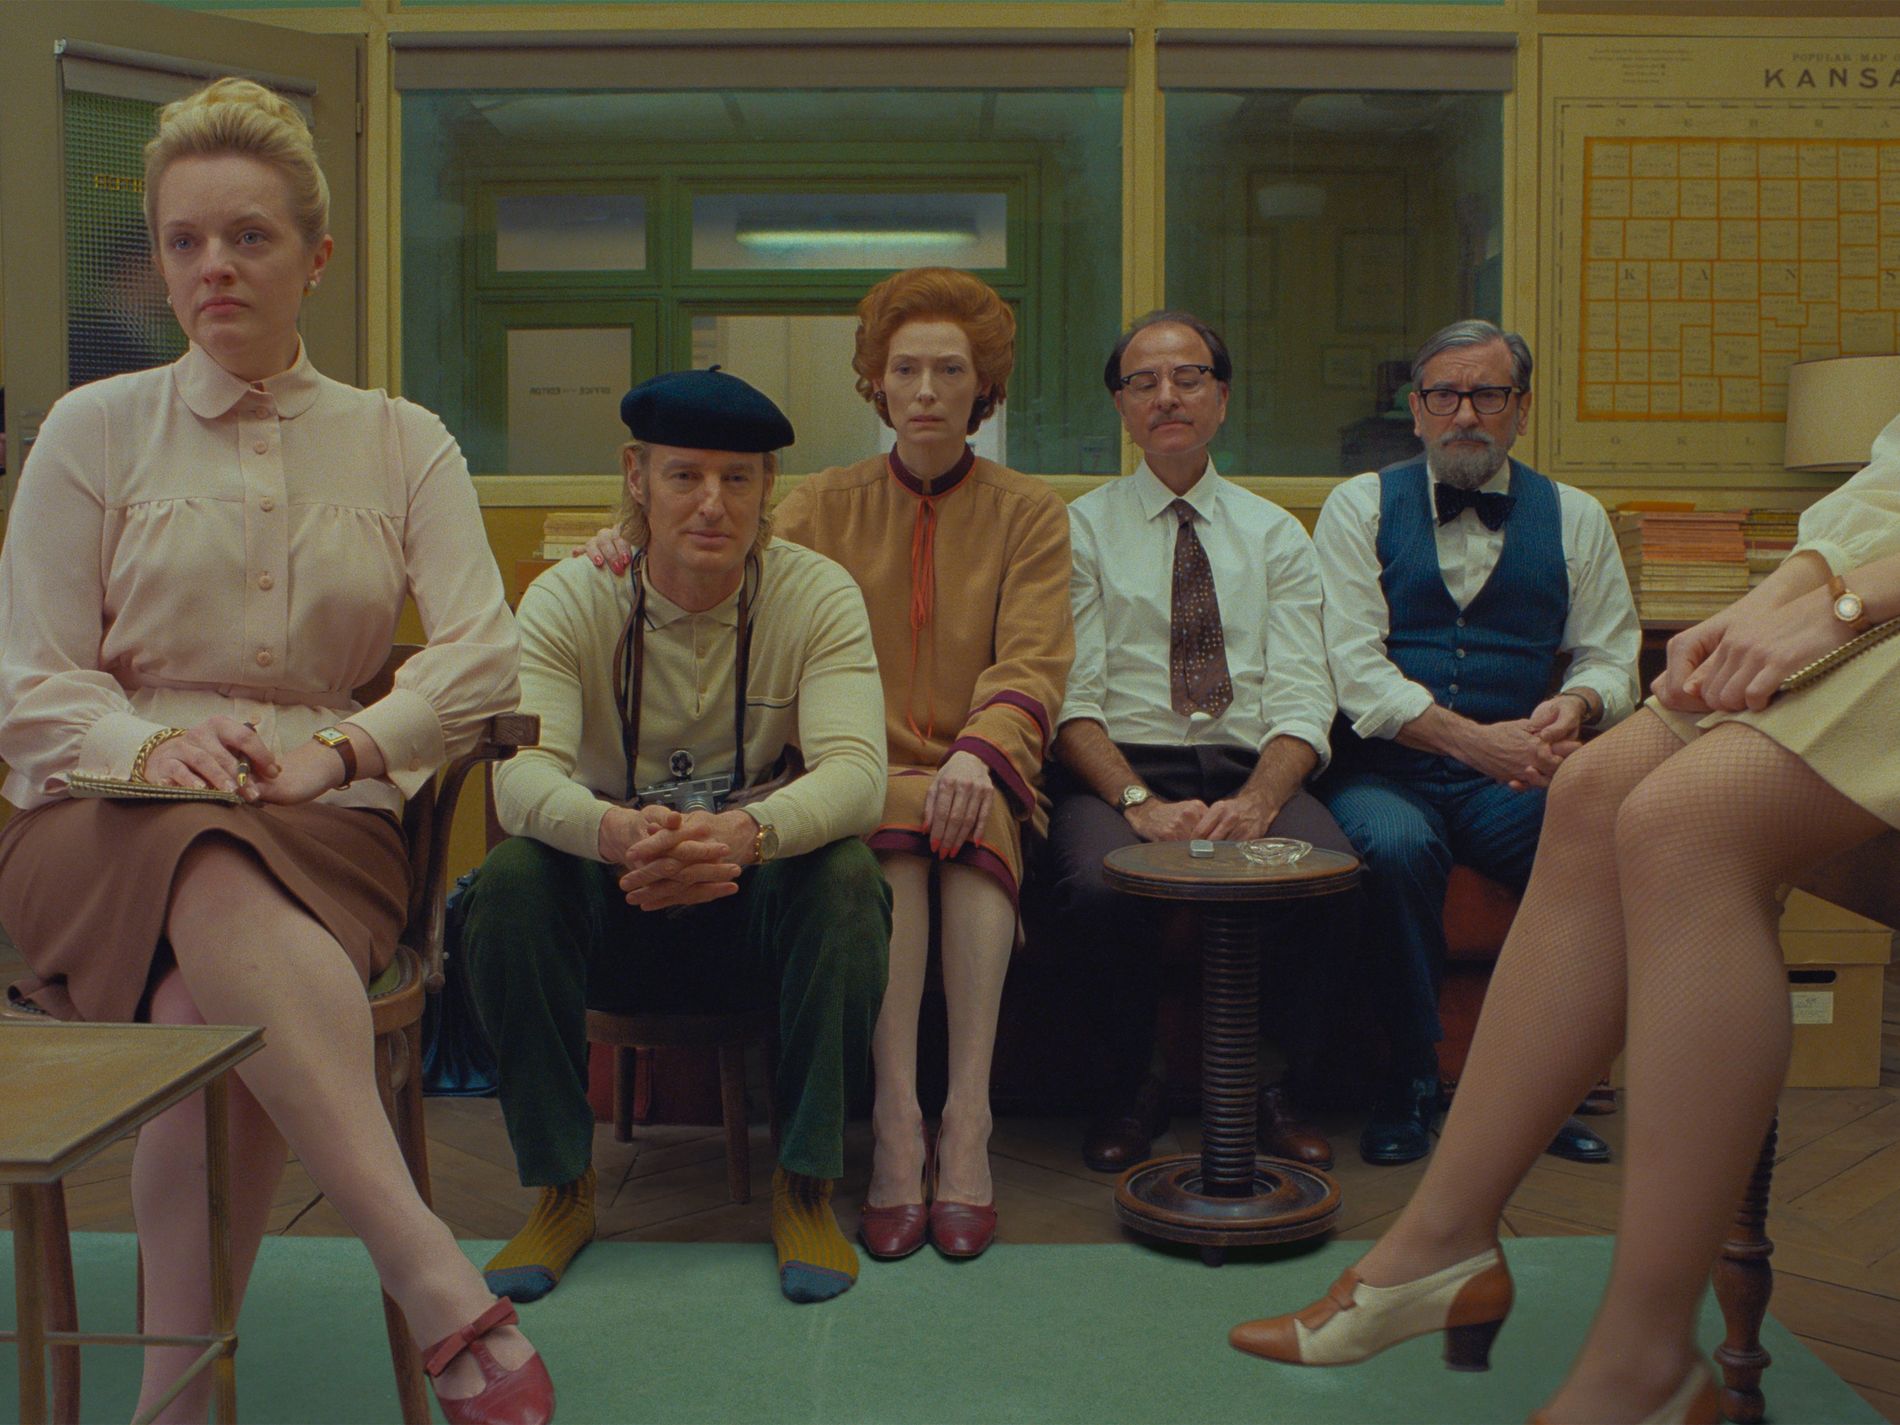 5 fashion collections inspired by Wes Anderson films